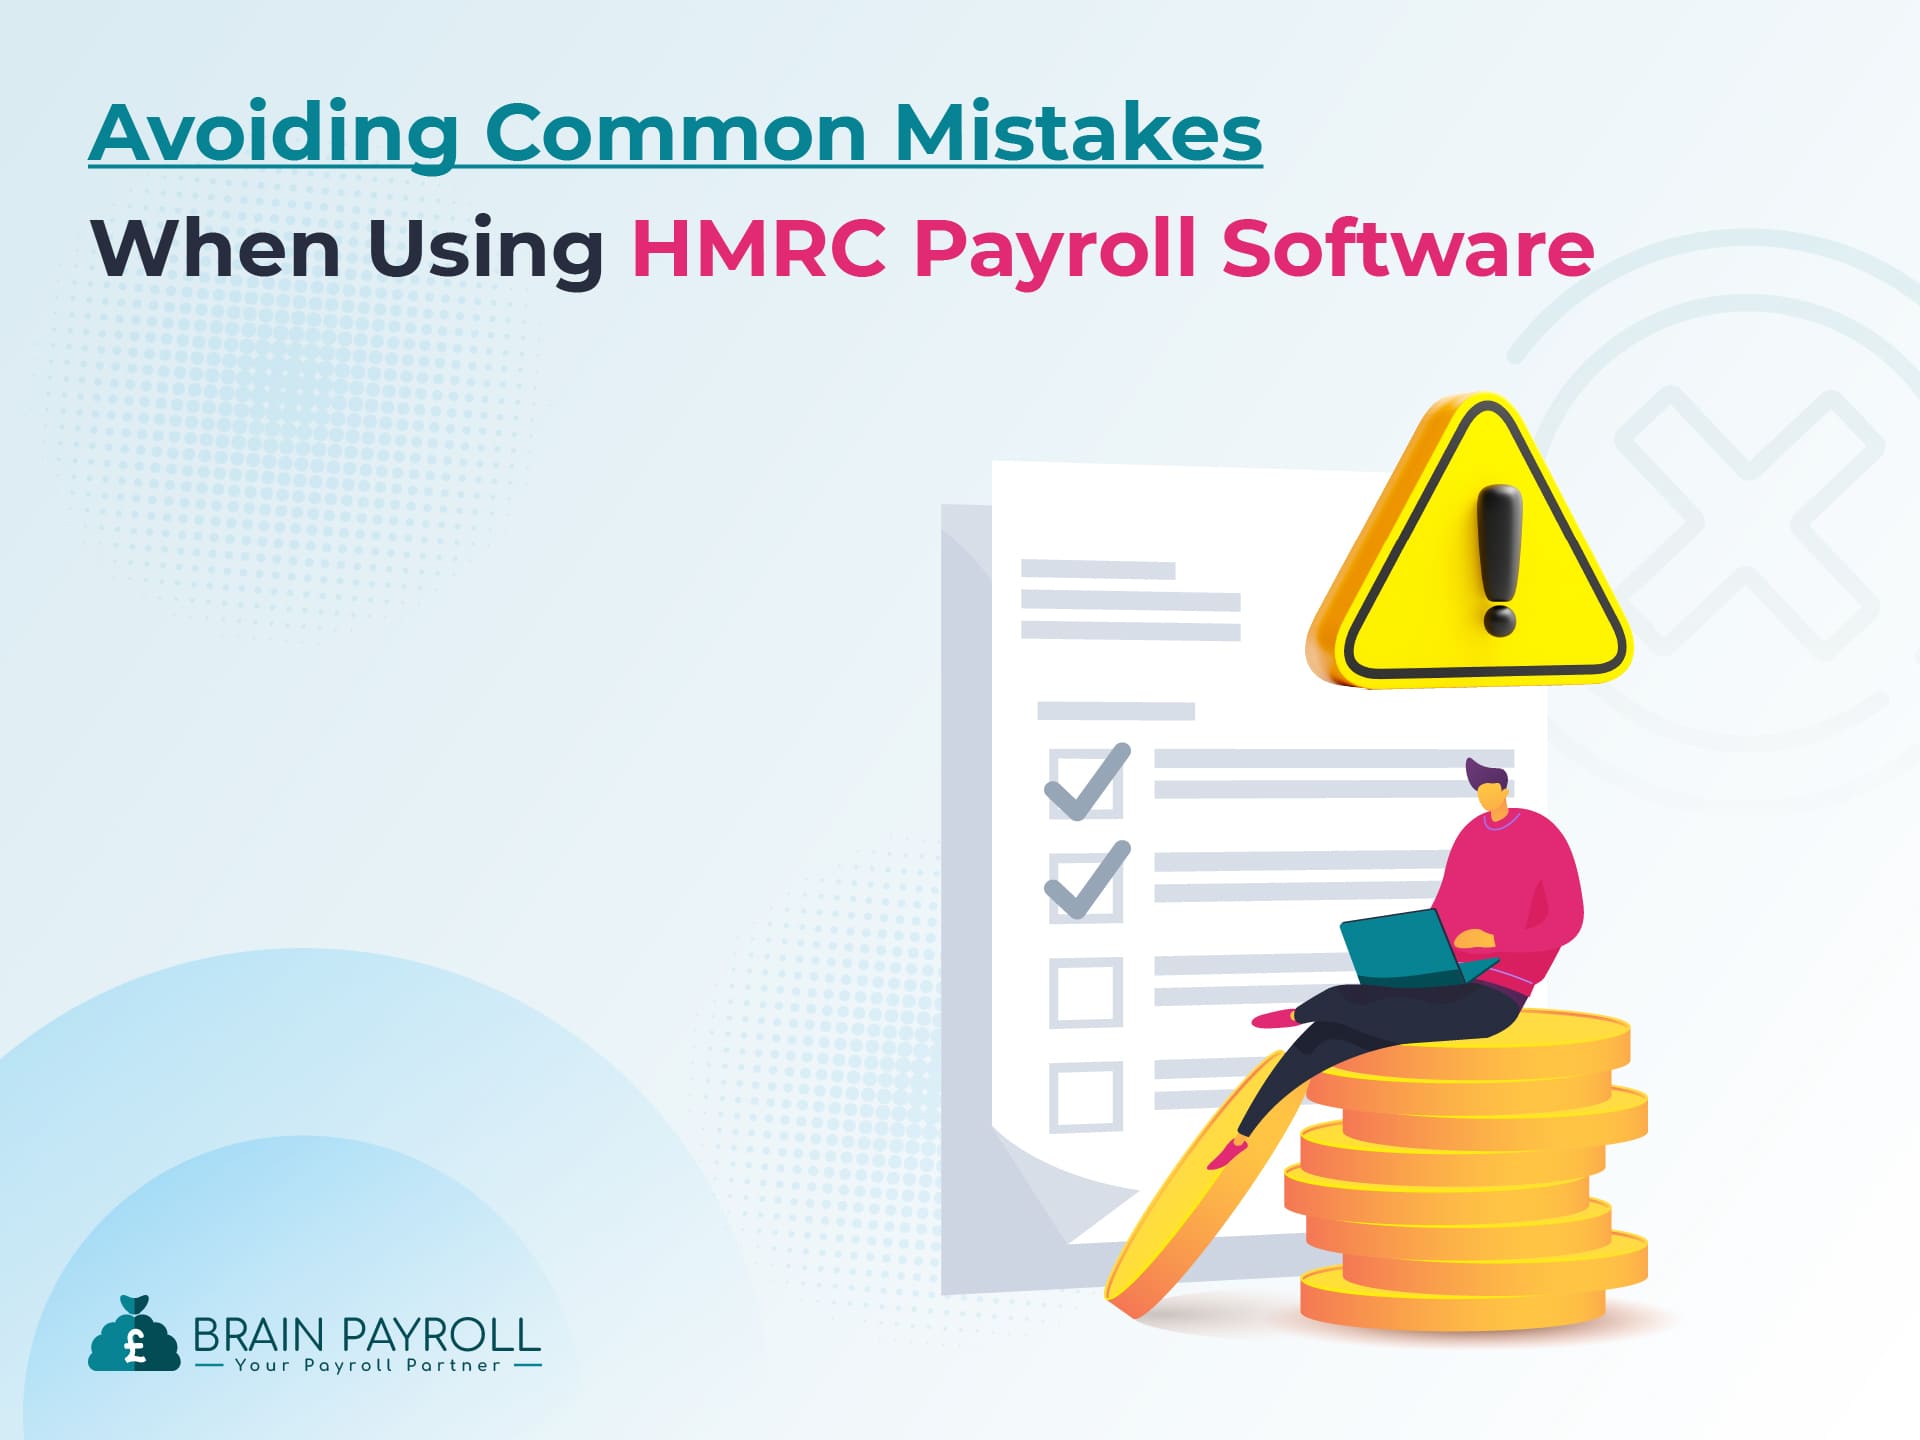 >Avoiding Common Mistakes When Using HMRC Payroll Software